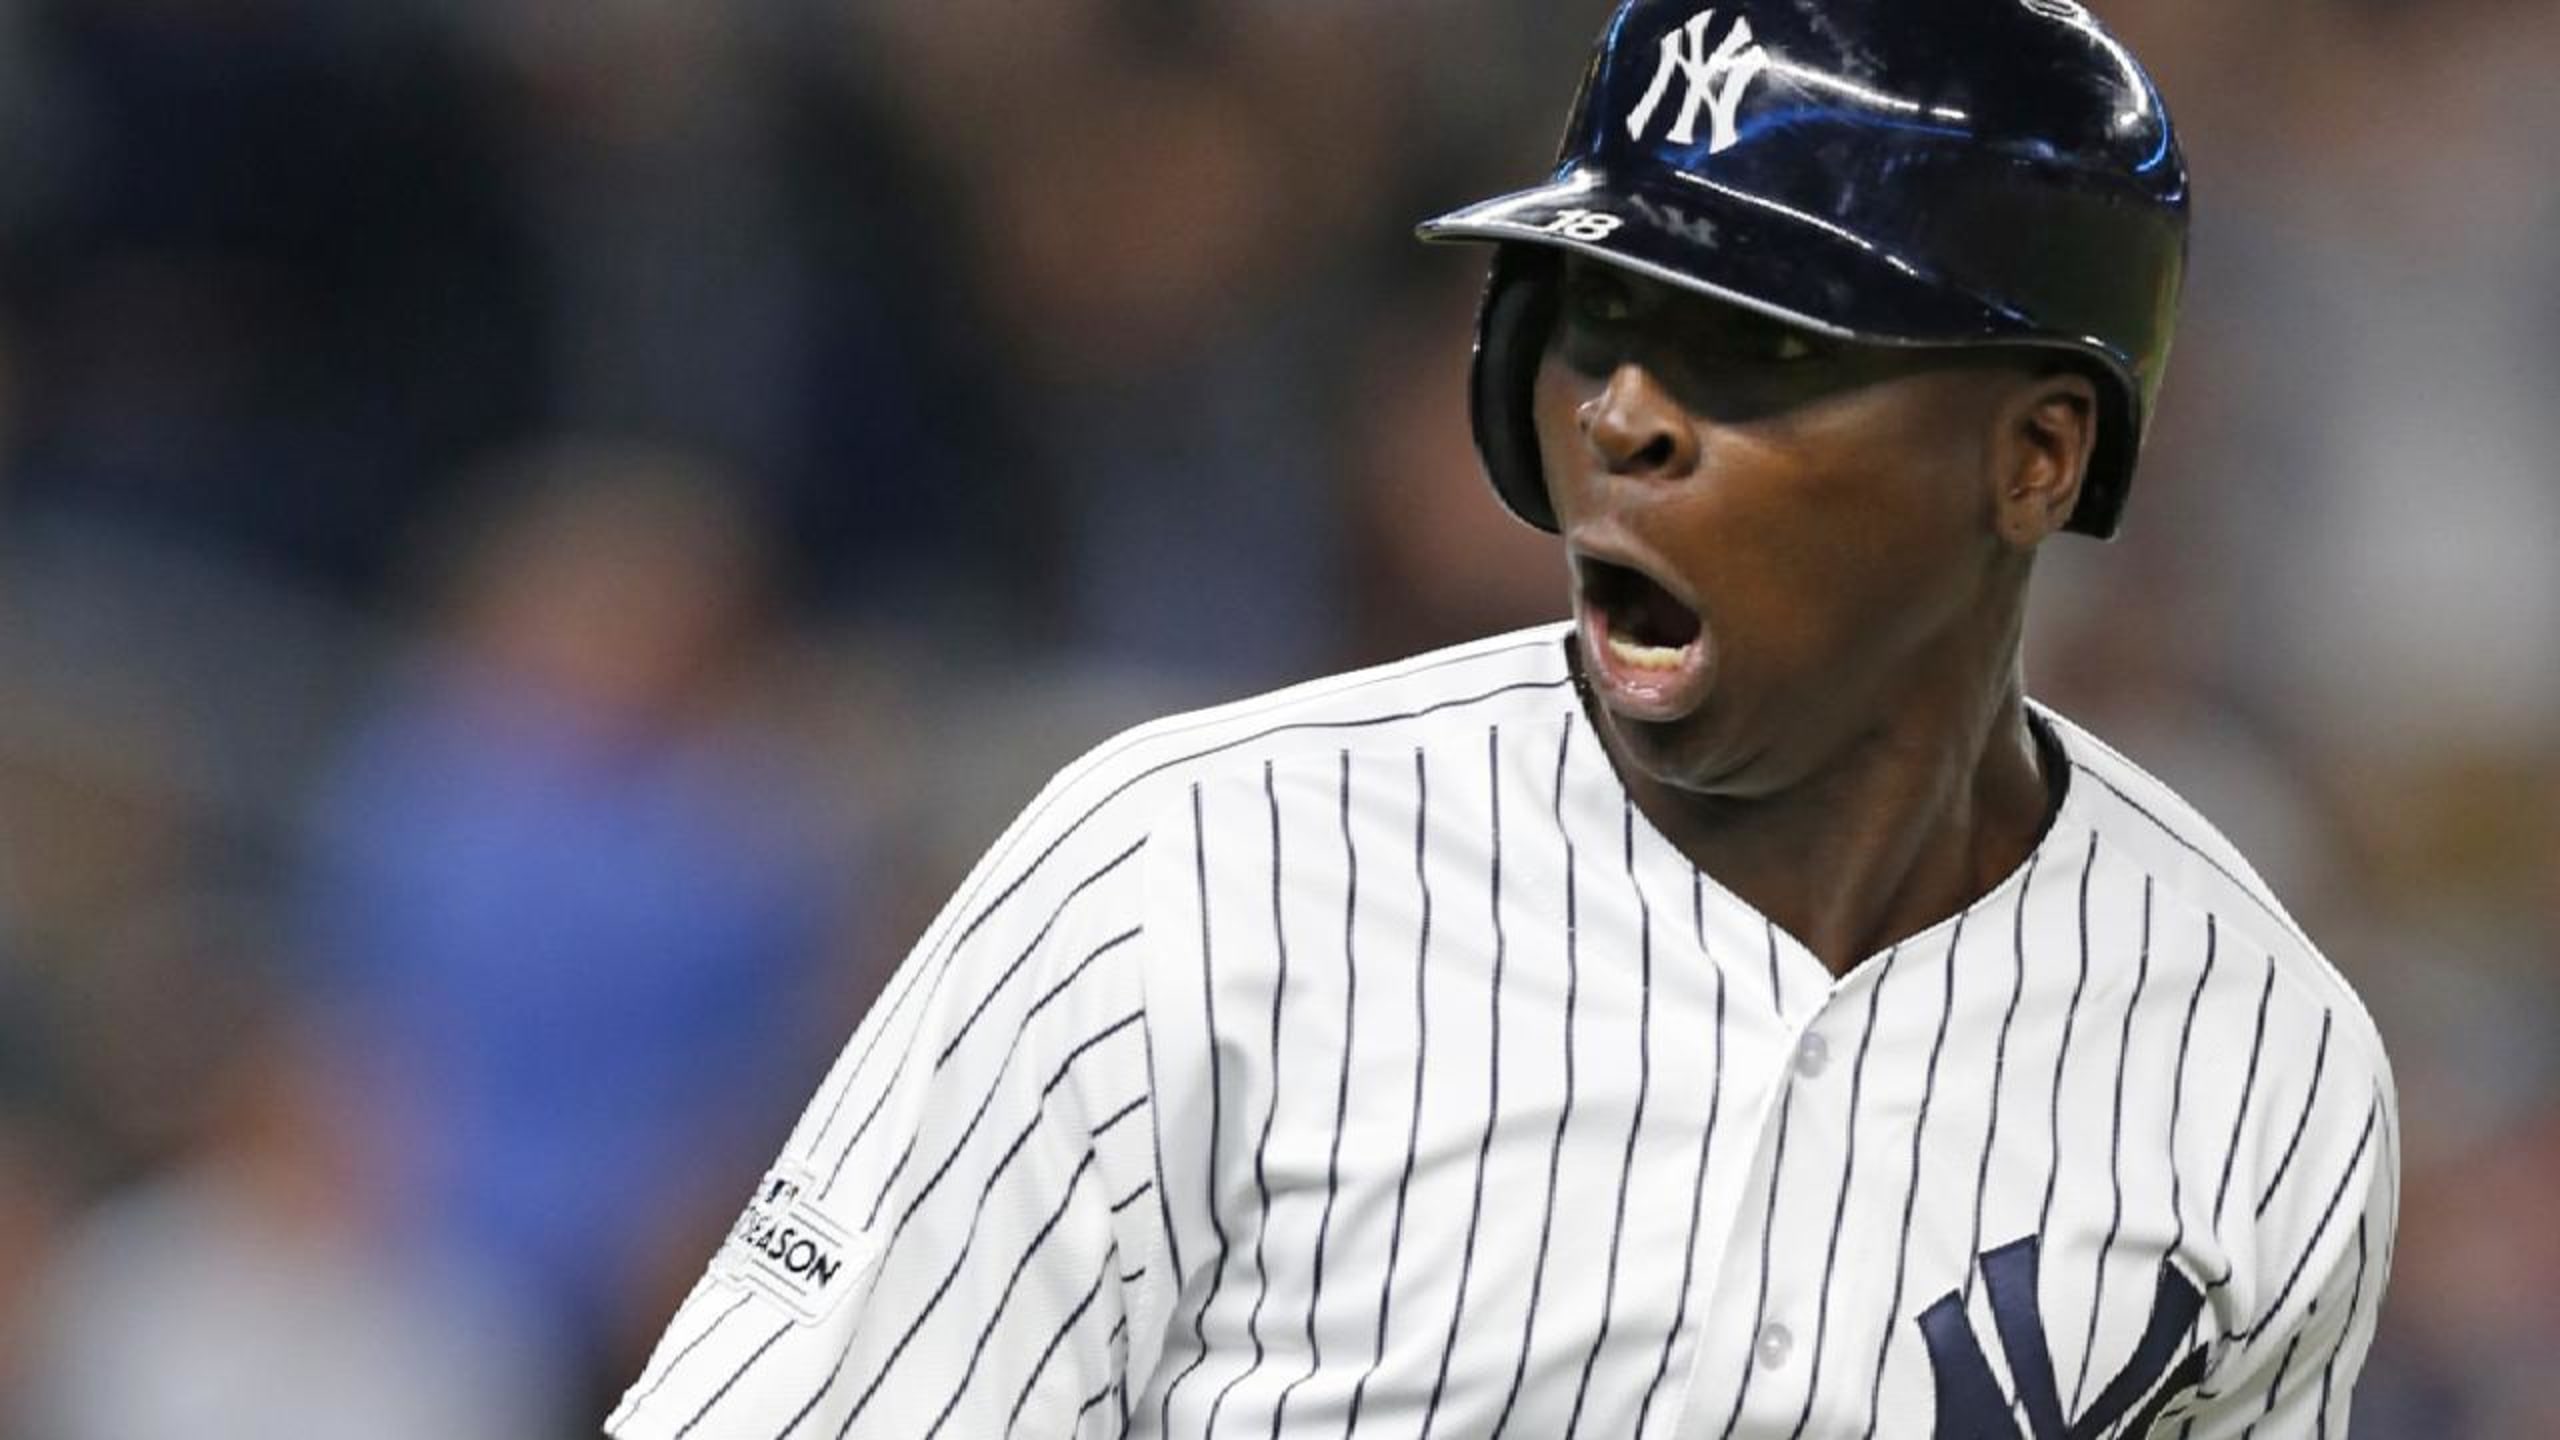 Didi Gregorius Signed New York Yankees Jersey (MAB Holo) Shortstop after  Jeter